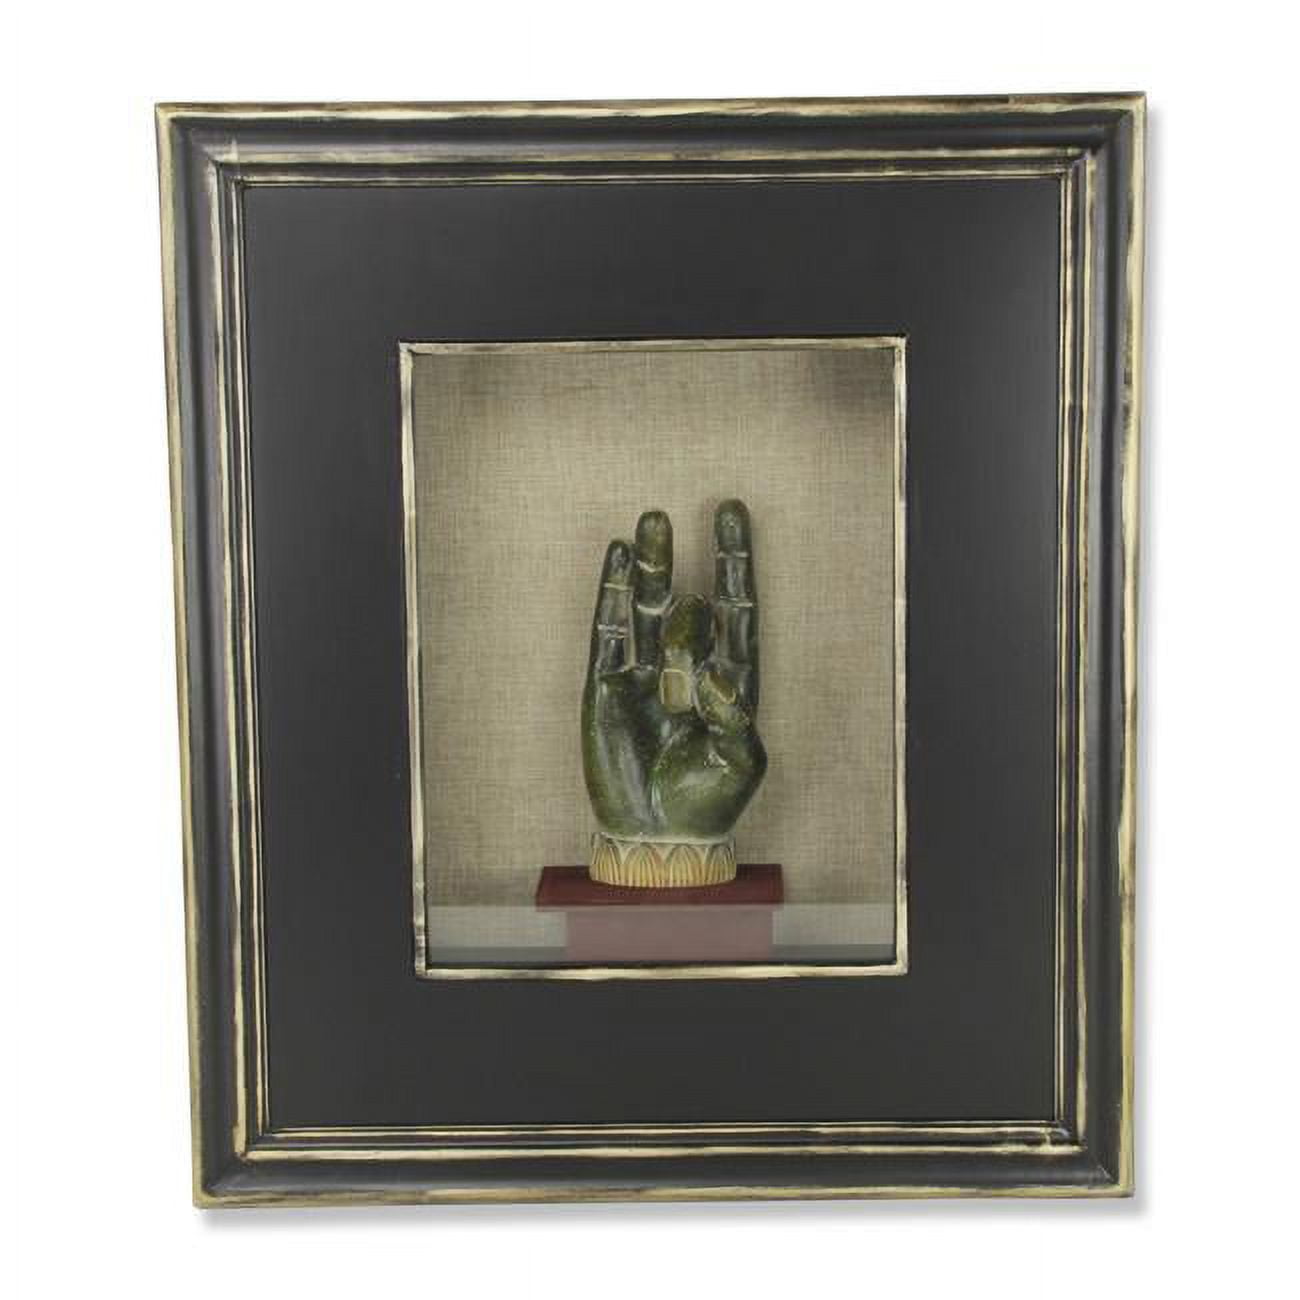 Picture of Cheungs FY-1525 27 x 23.25 x 5 in. Shuni Mudra Meditation Display